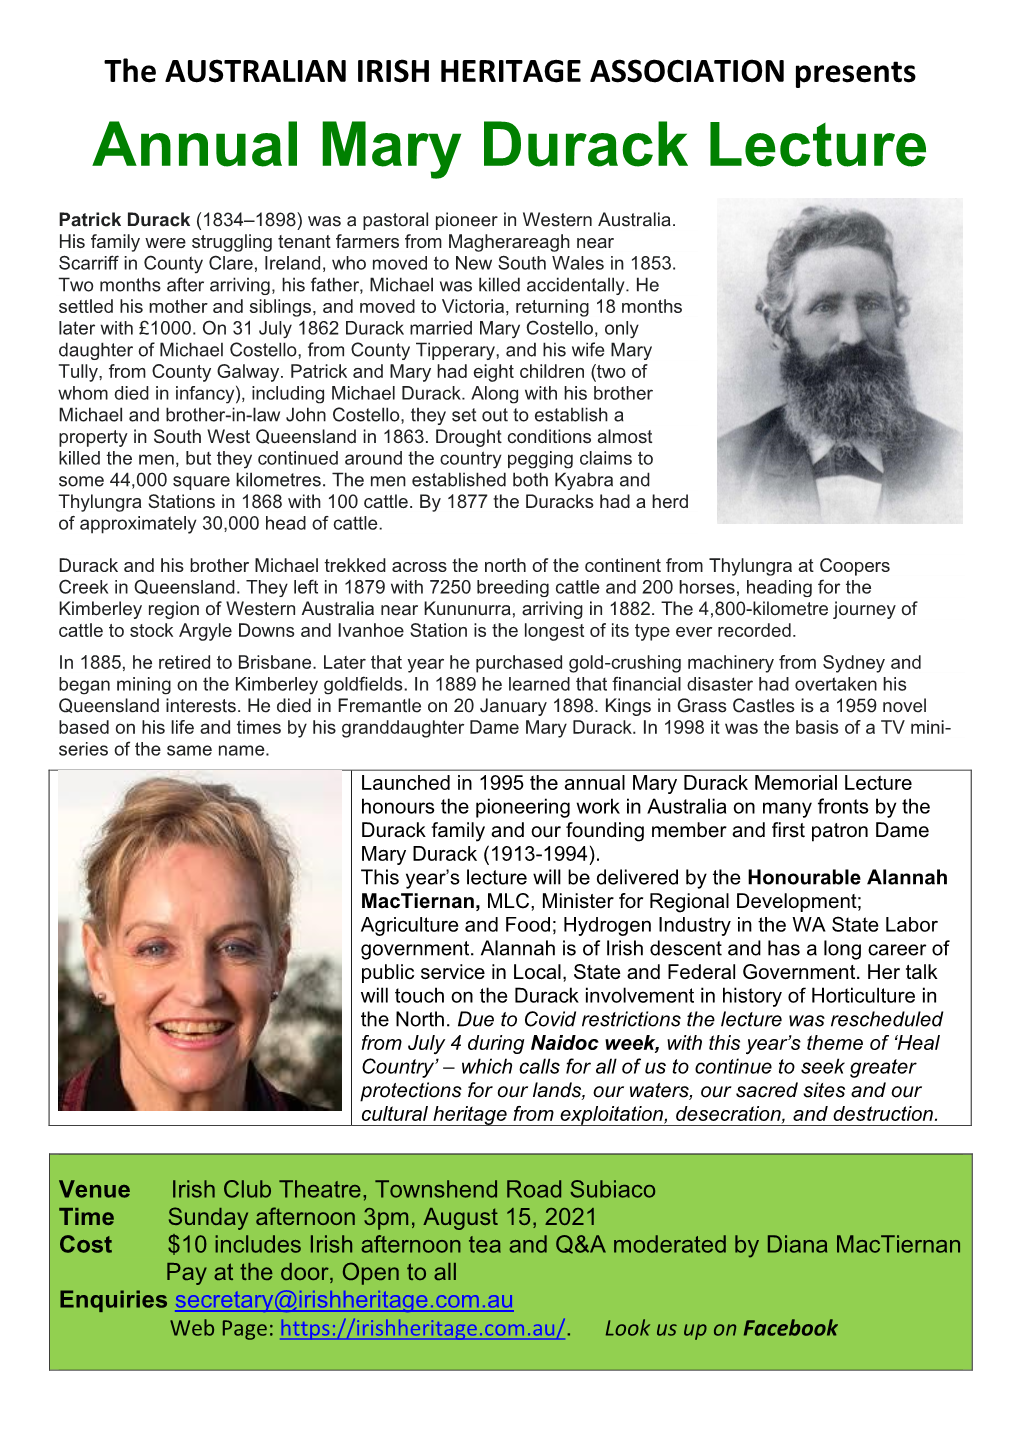 Annual Mary Durack Lecture